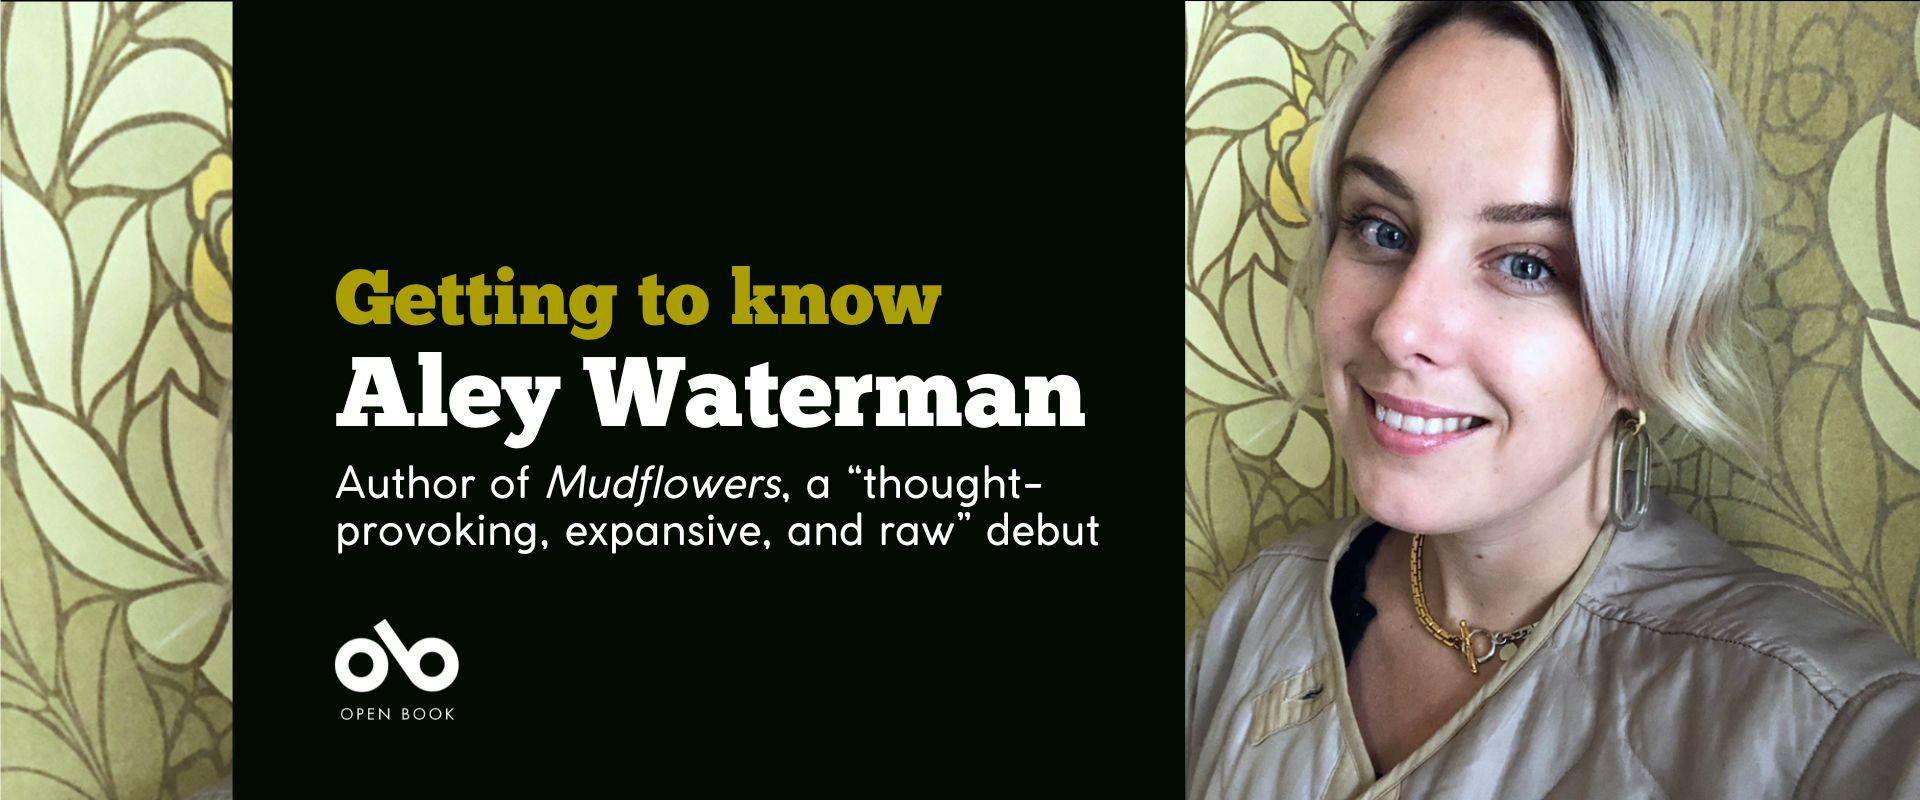 Banner image with photo of Aley Waterman and text reading Getting to know Aley Waterman Author of Mudflowers, a “thought-provoking, expansive, and raw” debut. Open Book logo bottom left